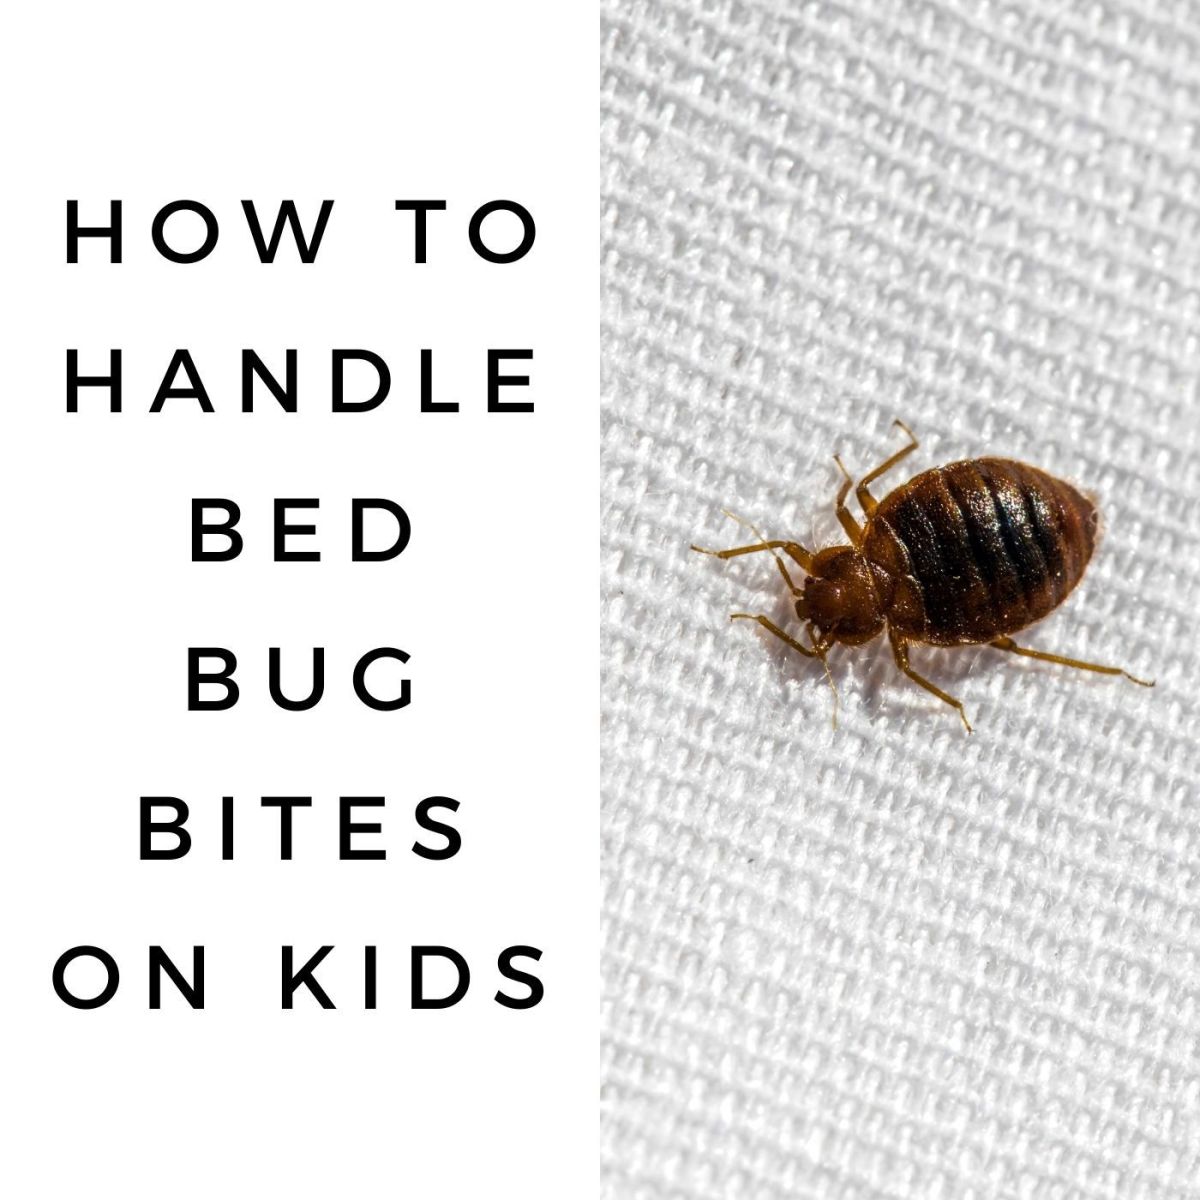 How to Handle Bed Bug Bites on Kids